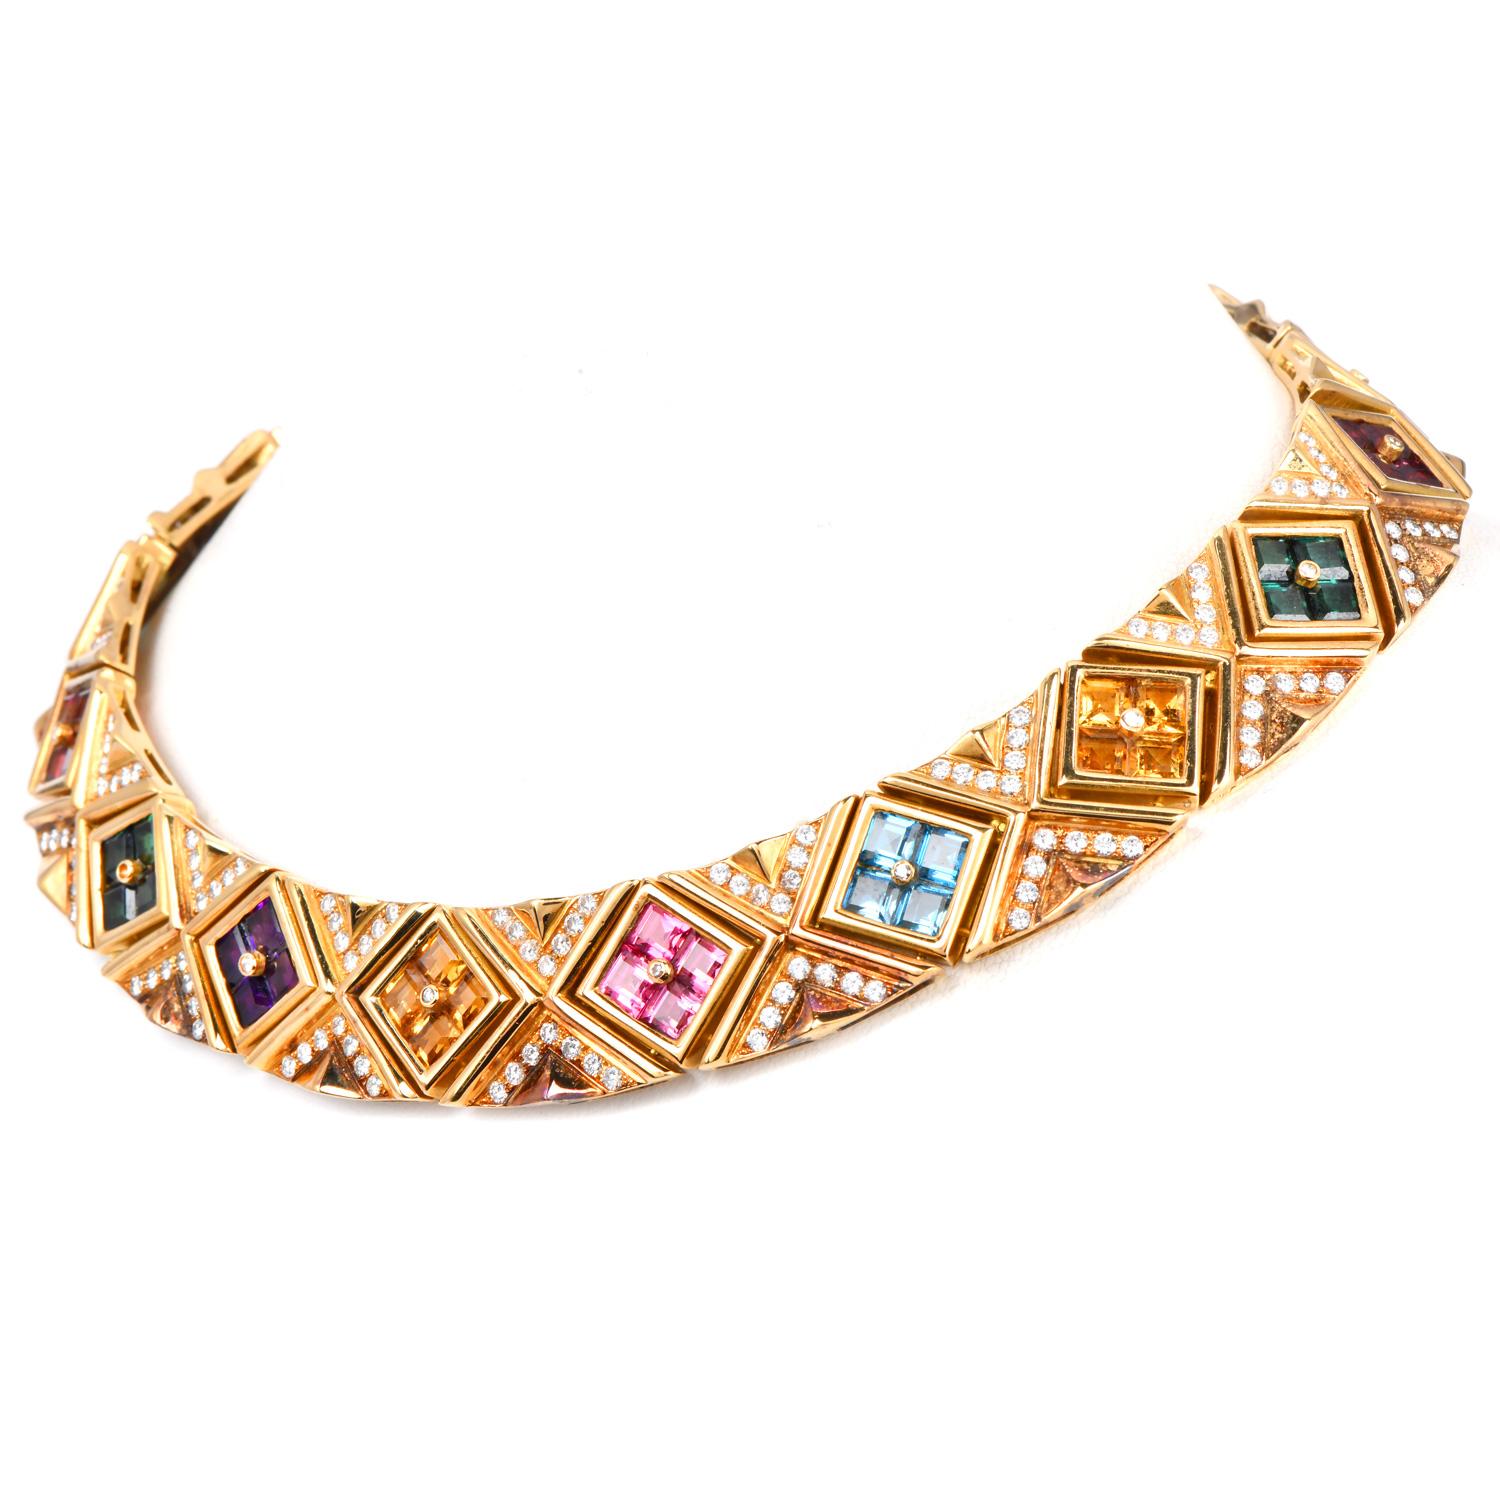 Captivating 1980s multi-gemstone choker necklace. Crafted with precision, each square link is beautifully set with square step-cut gemstones including amethyst, sun-kissed citrine, serene topaz, and tourmaline.

These 68 colored stones, totaling an